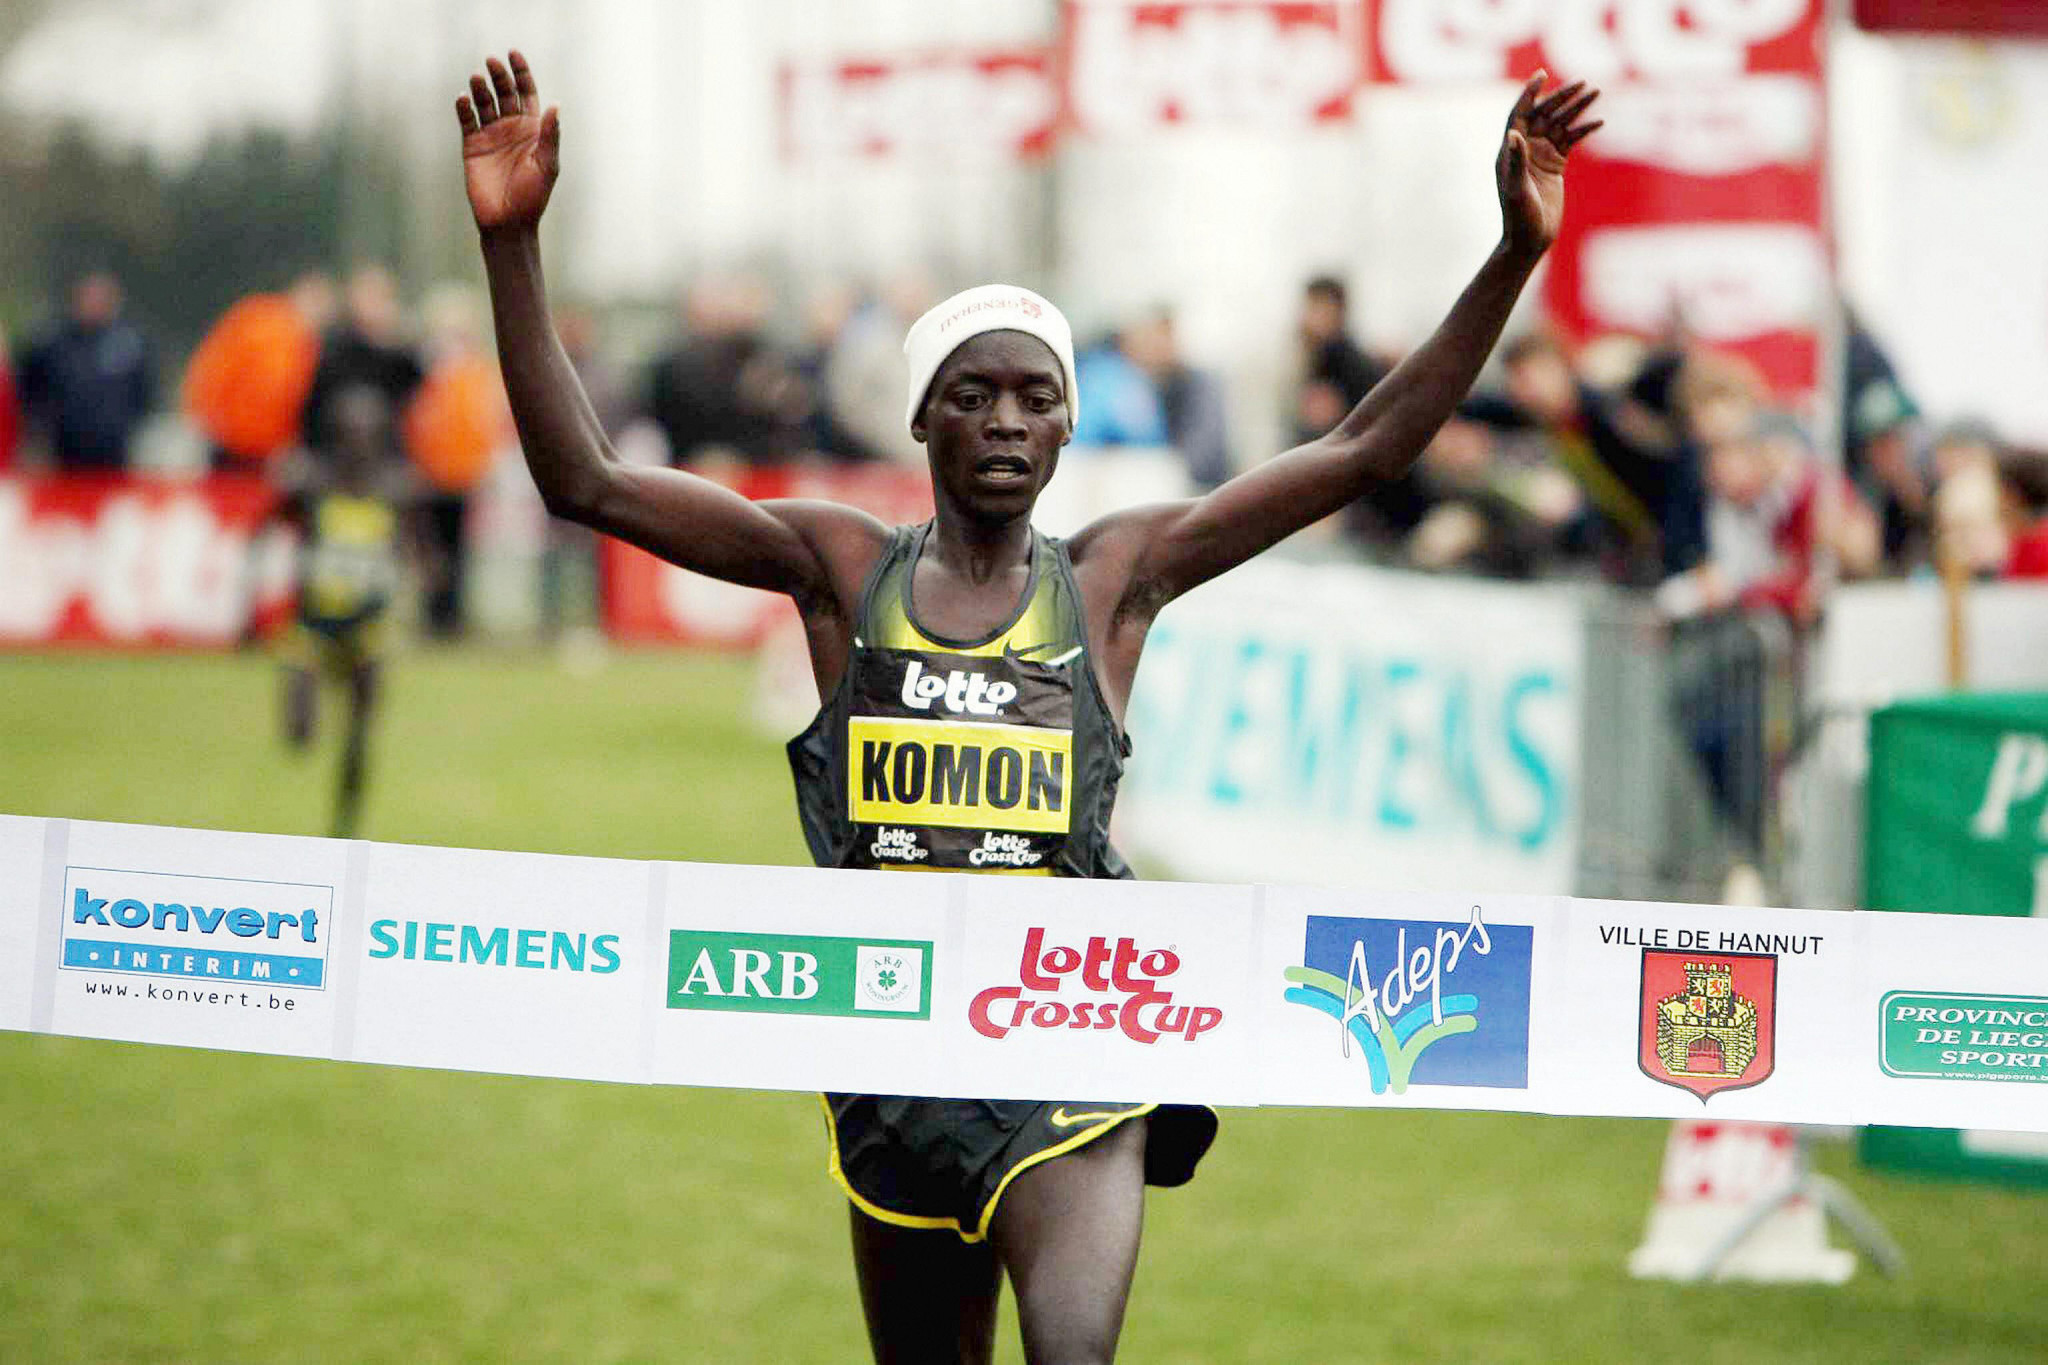 Strong African presence at IAAF Cross Country Permit in Spain